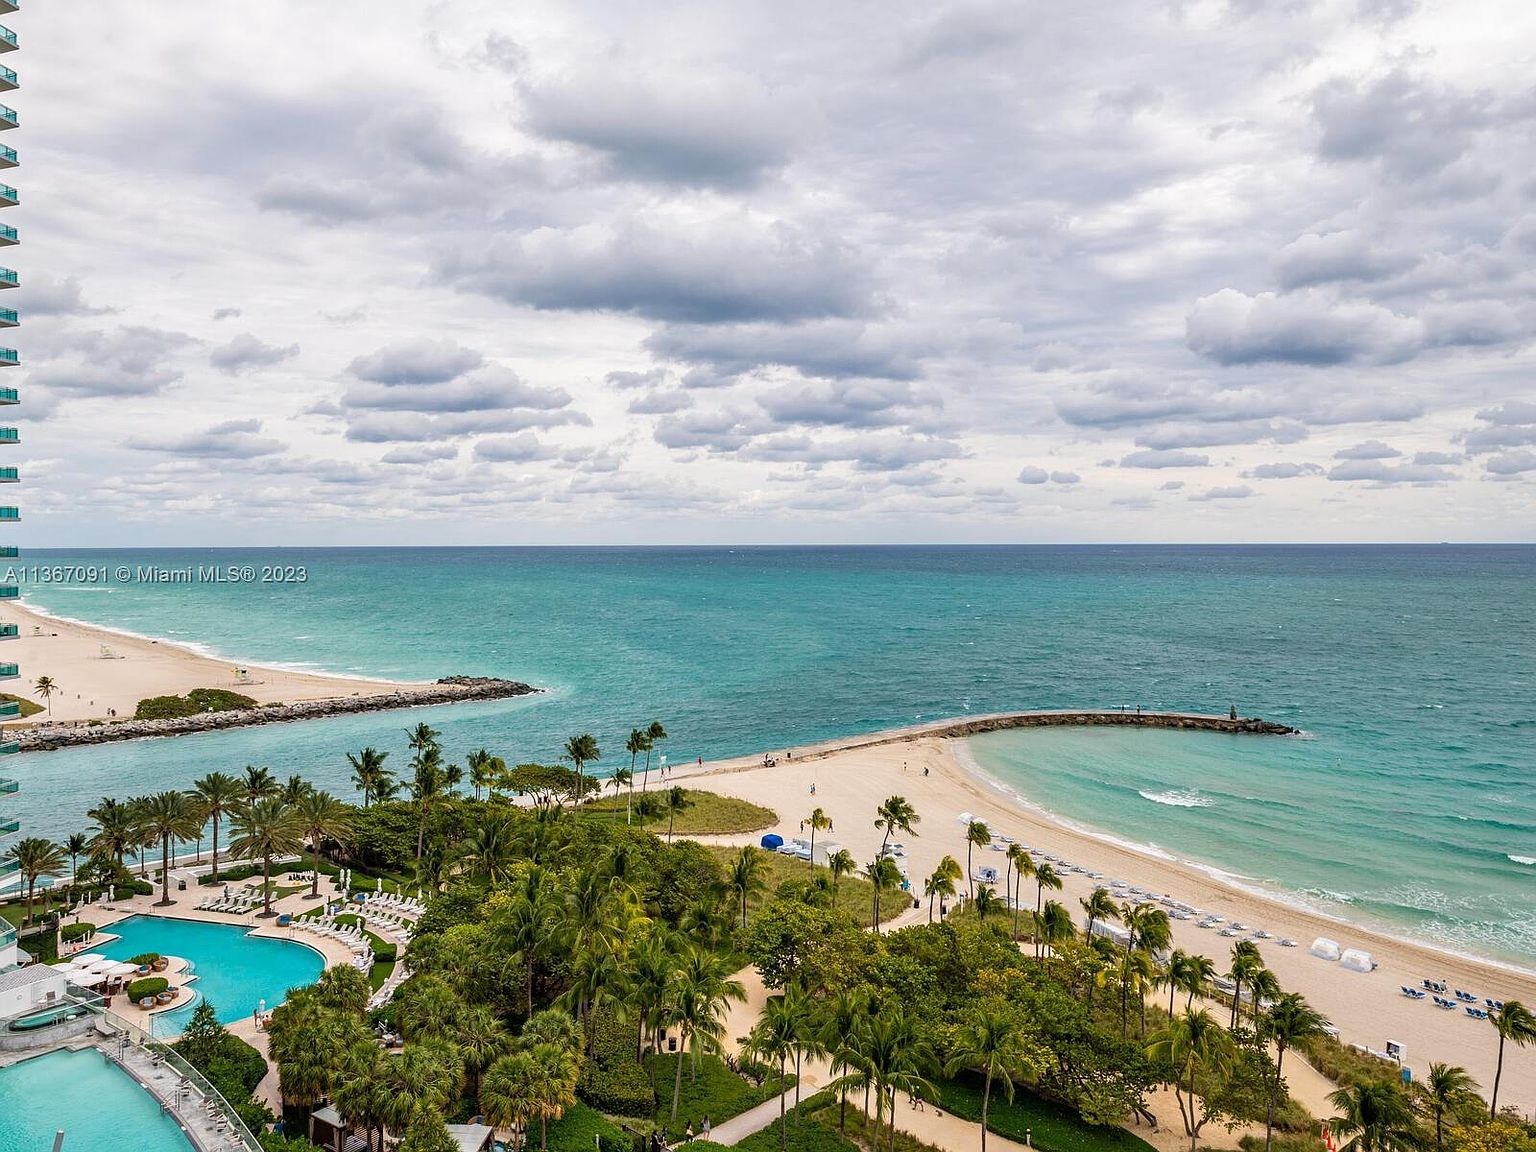 History of Bal Harbour, Florida: Hotels and Miami tourism